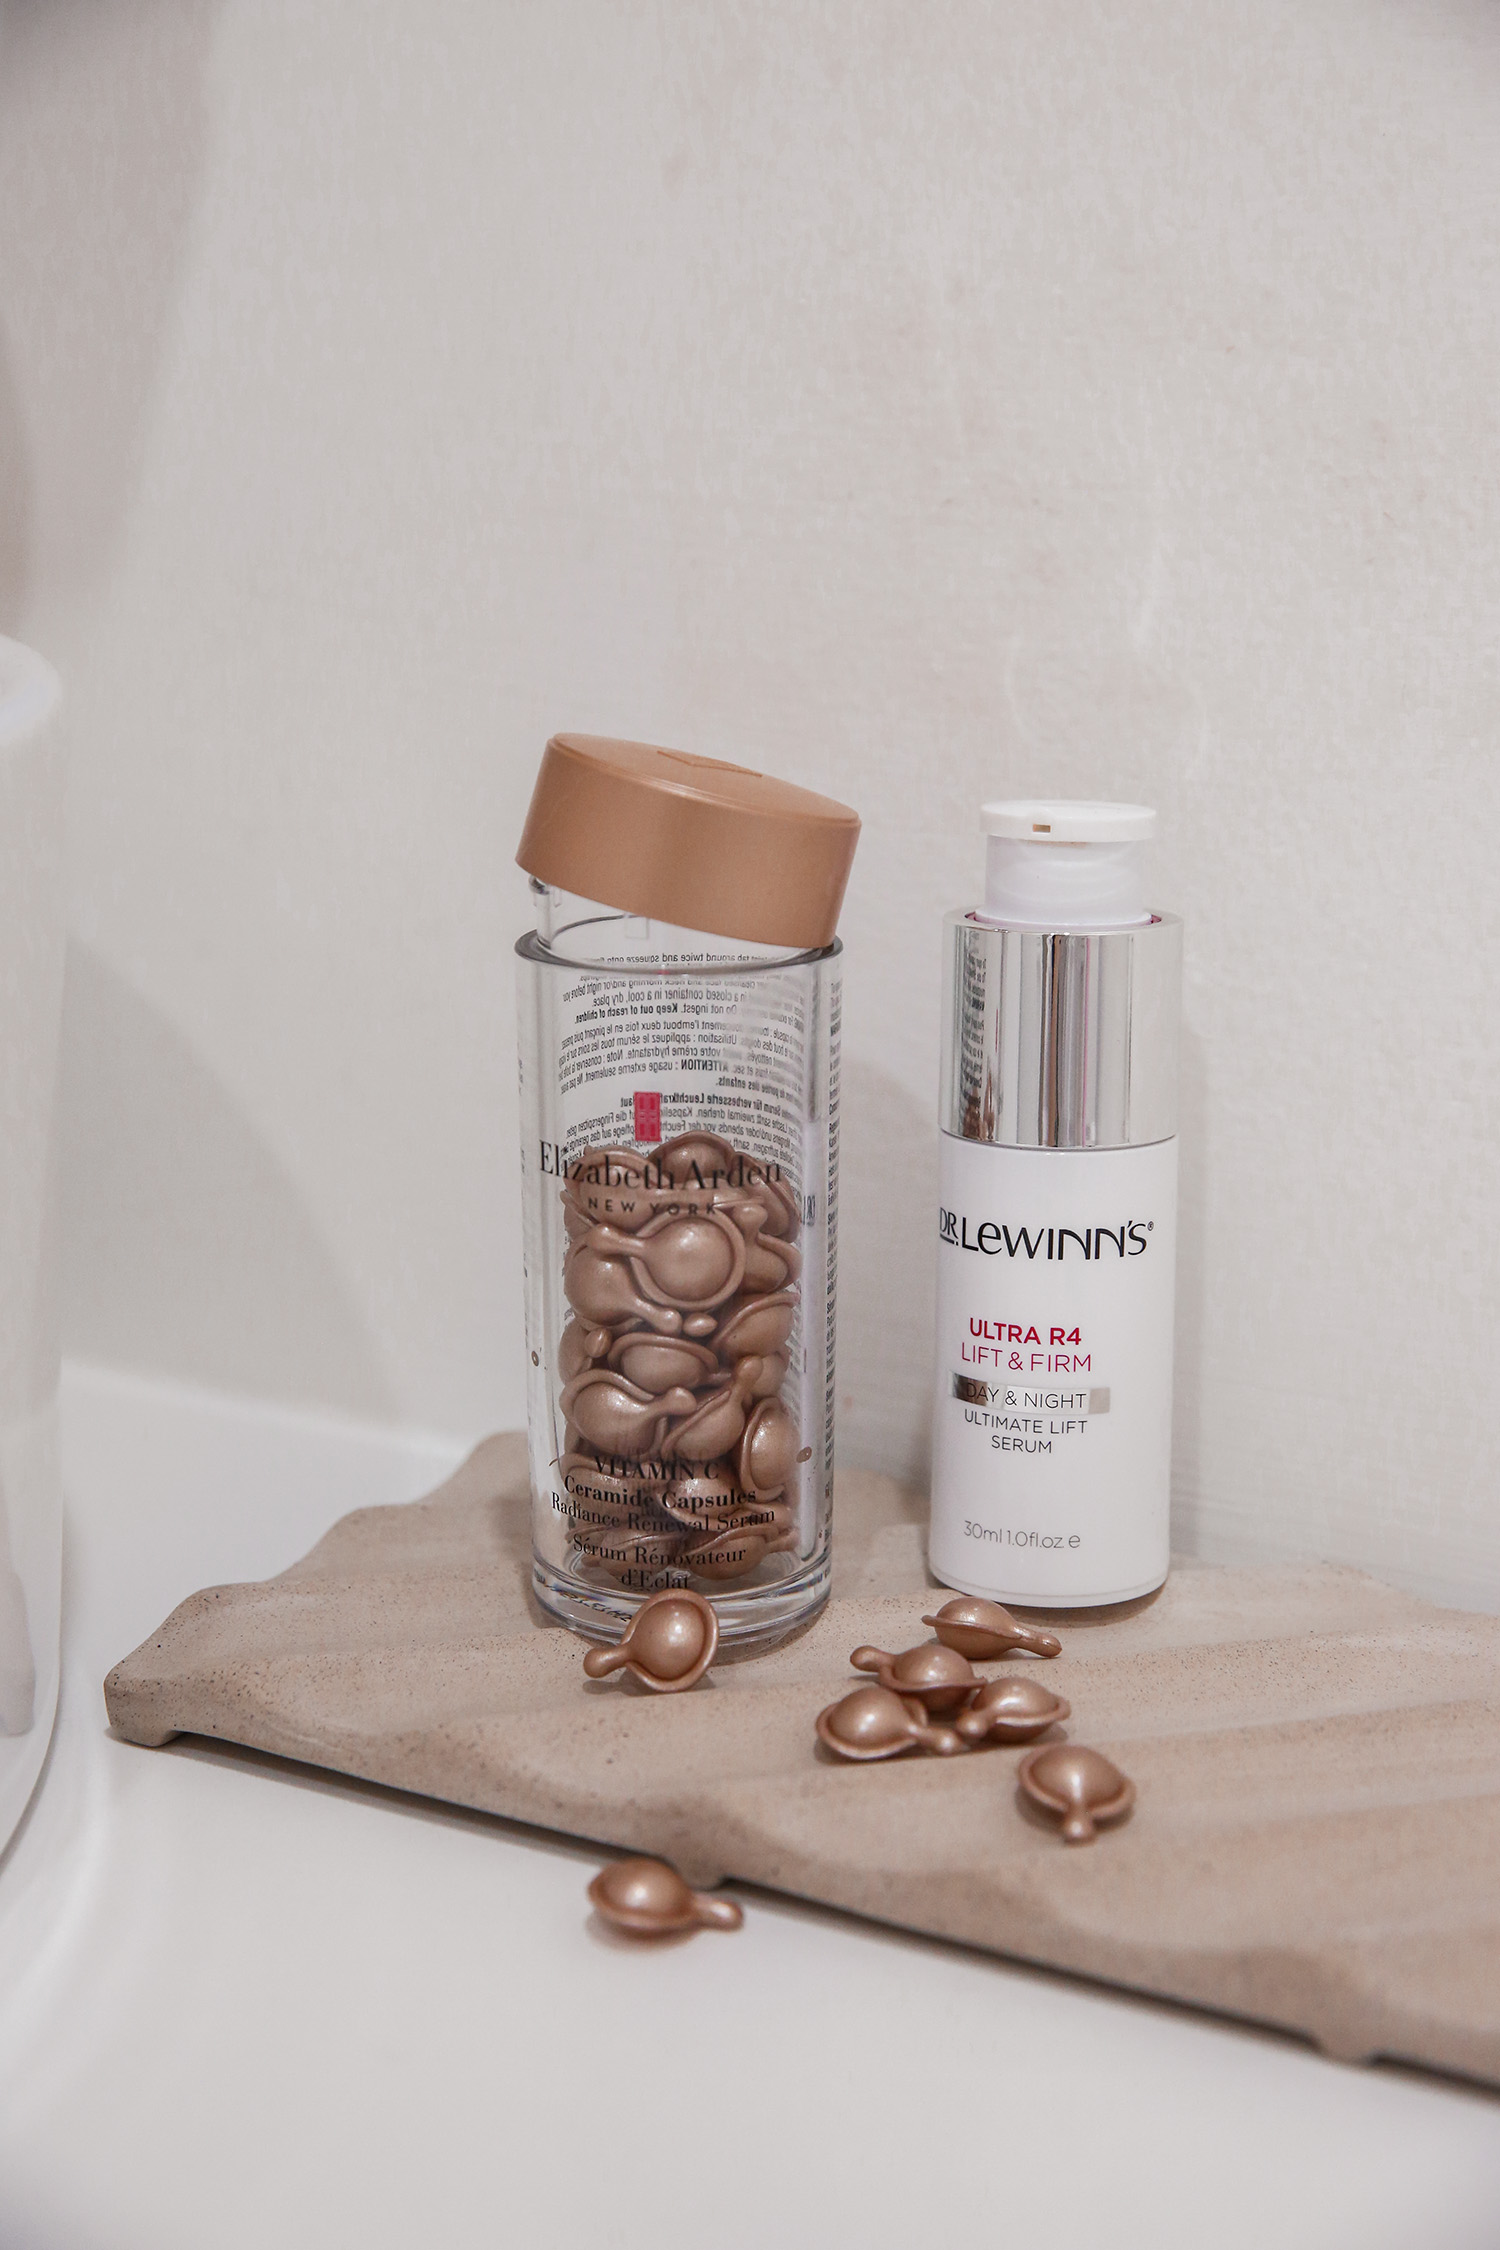 Elizabeth Ardern Vitamin C Ceramide Capsules and Dr Lewinns Ultra R4 Lift and Firm Serum Review